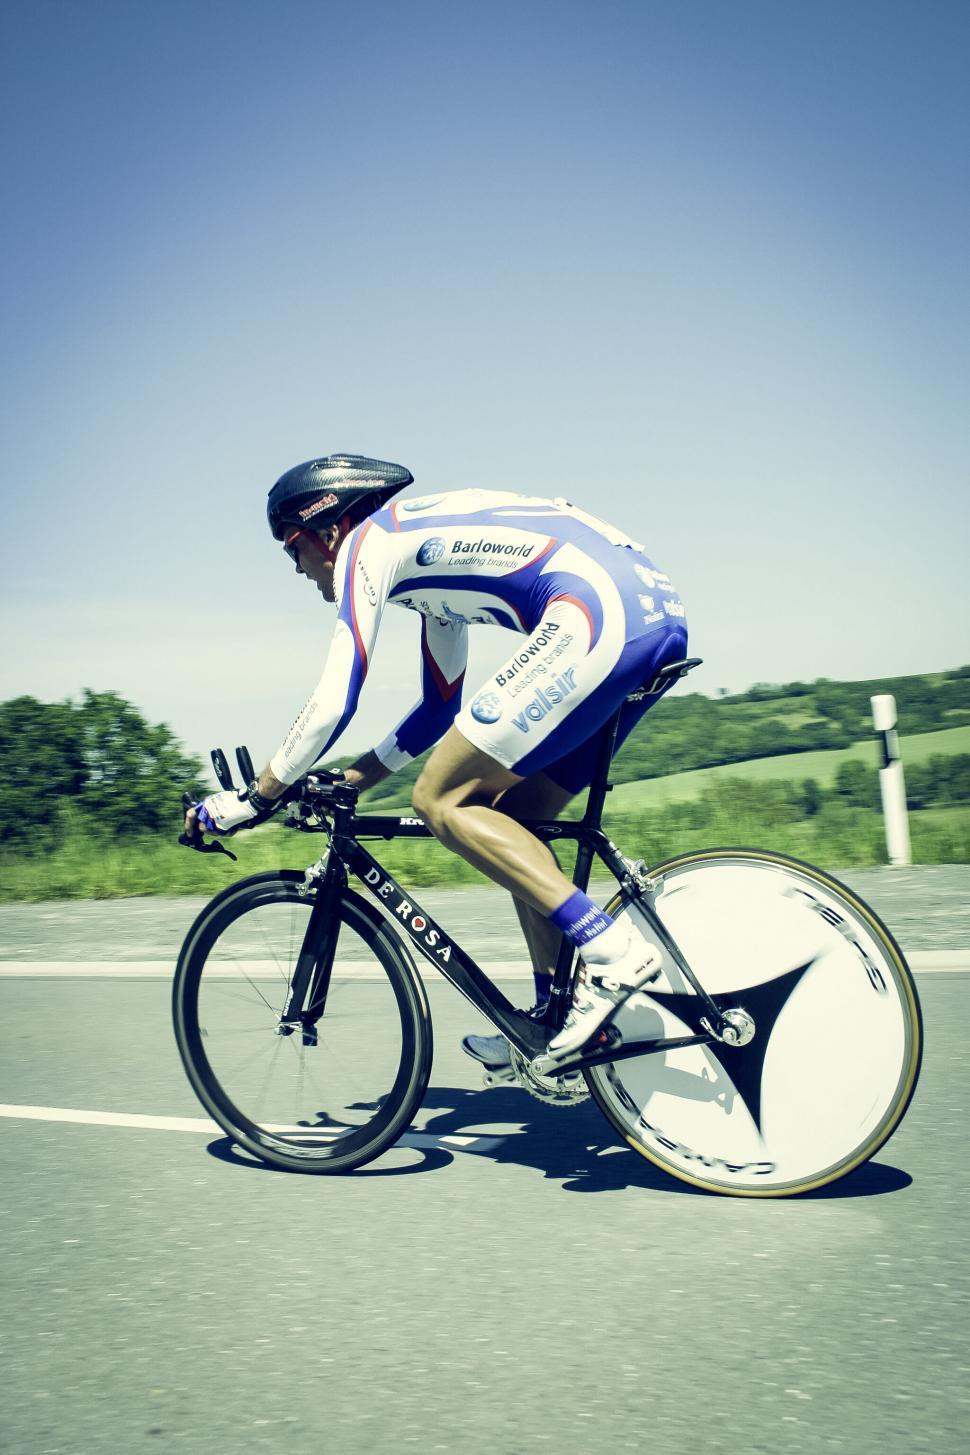 Free Image of Cyclist in motion on a road race 